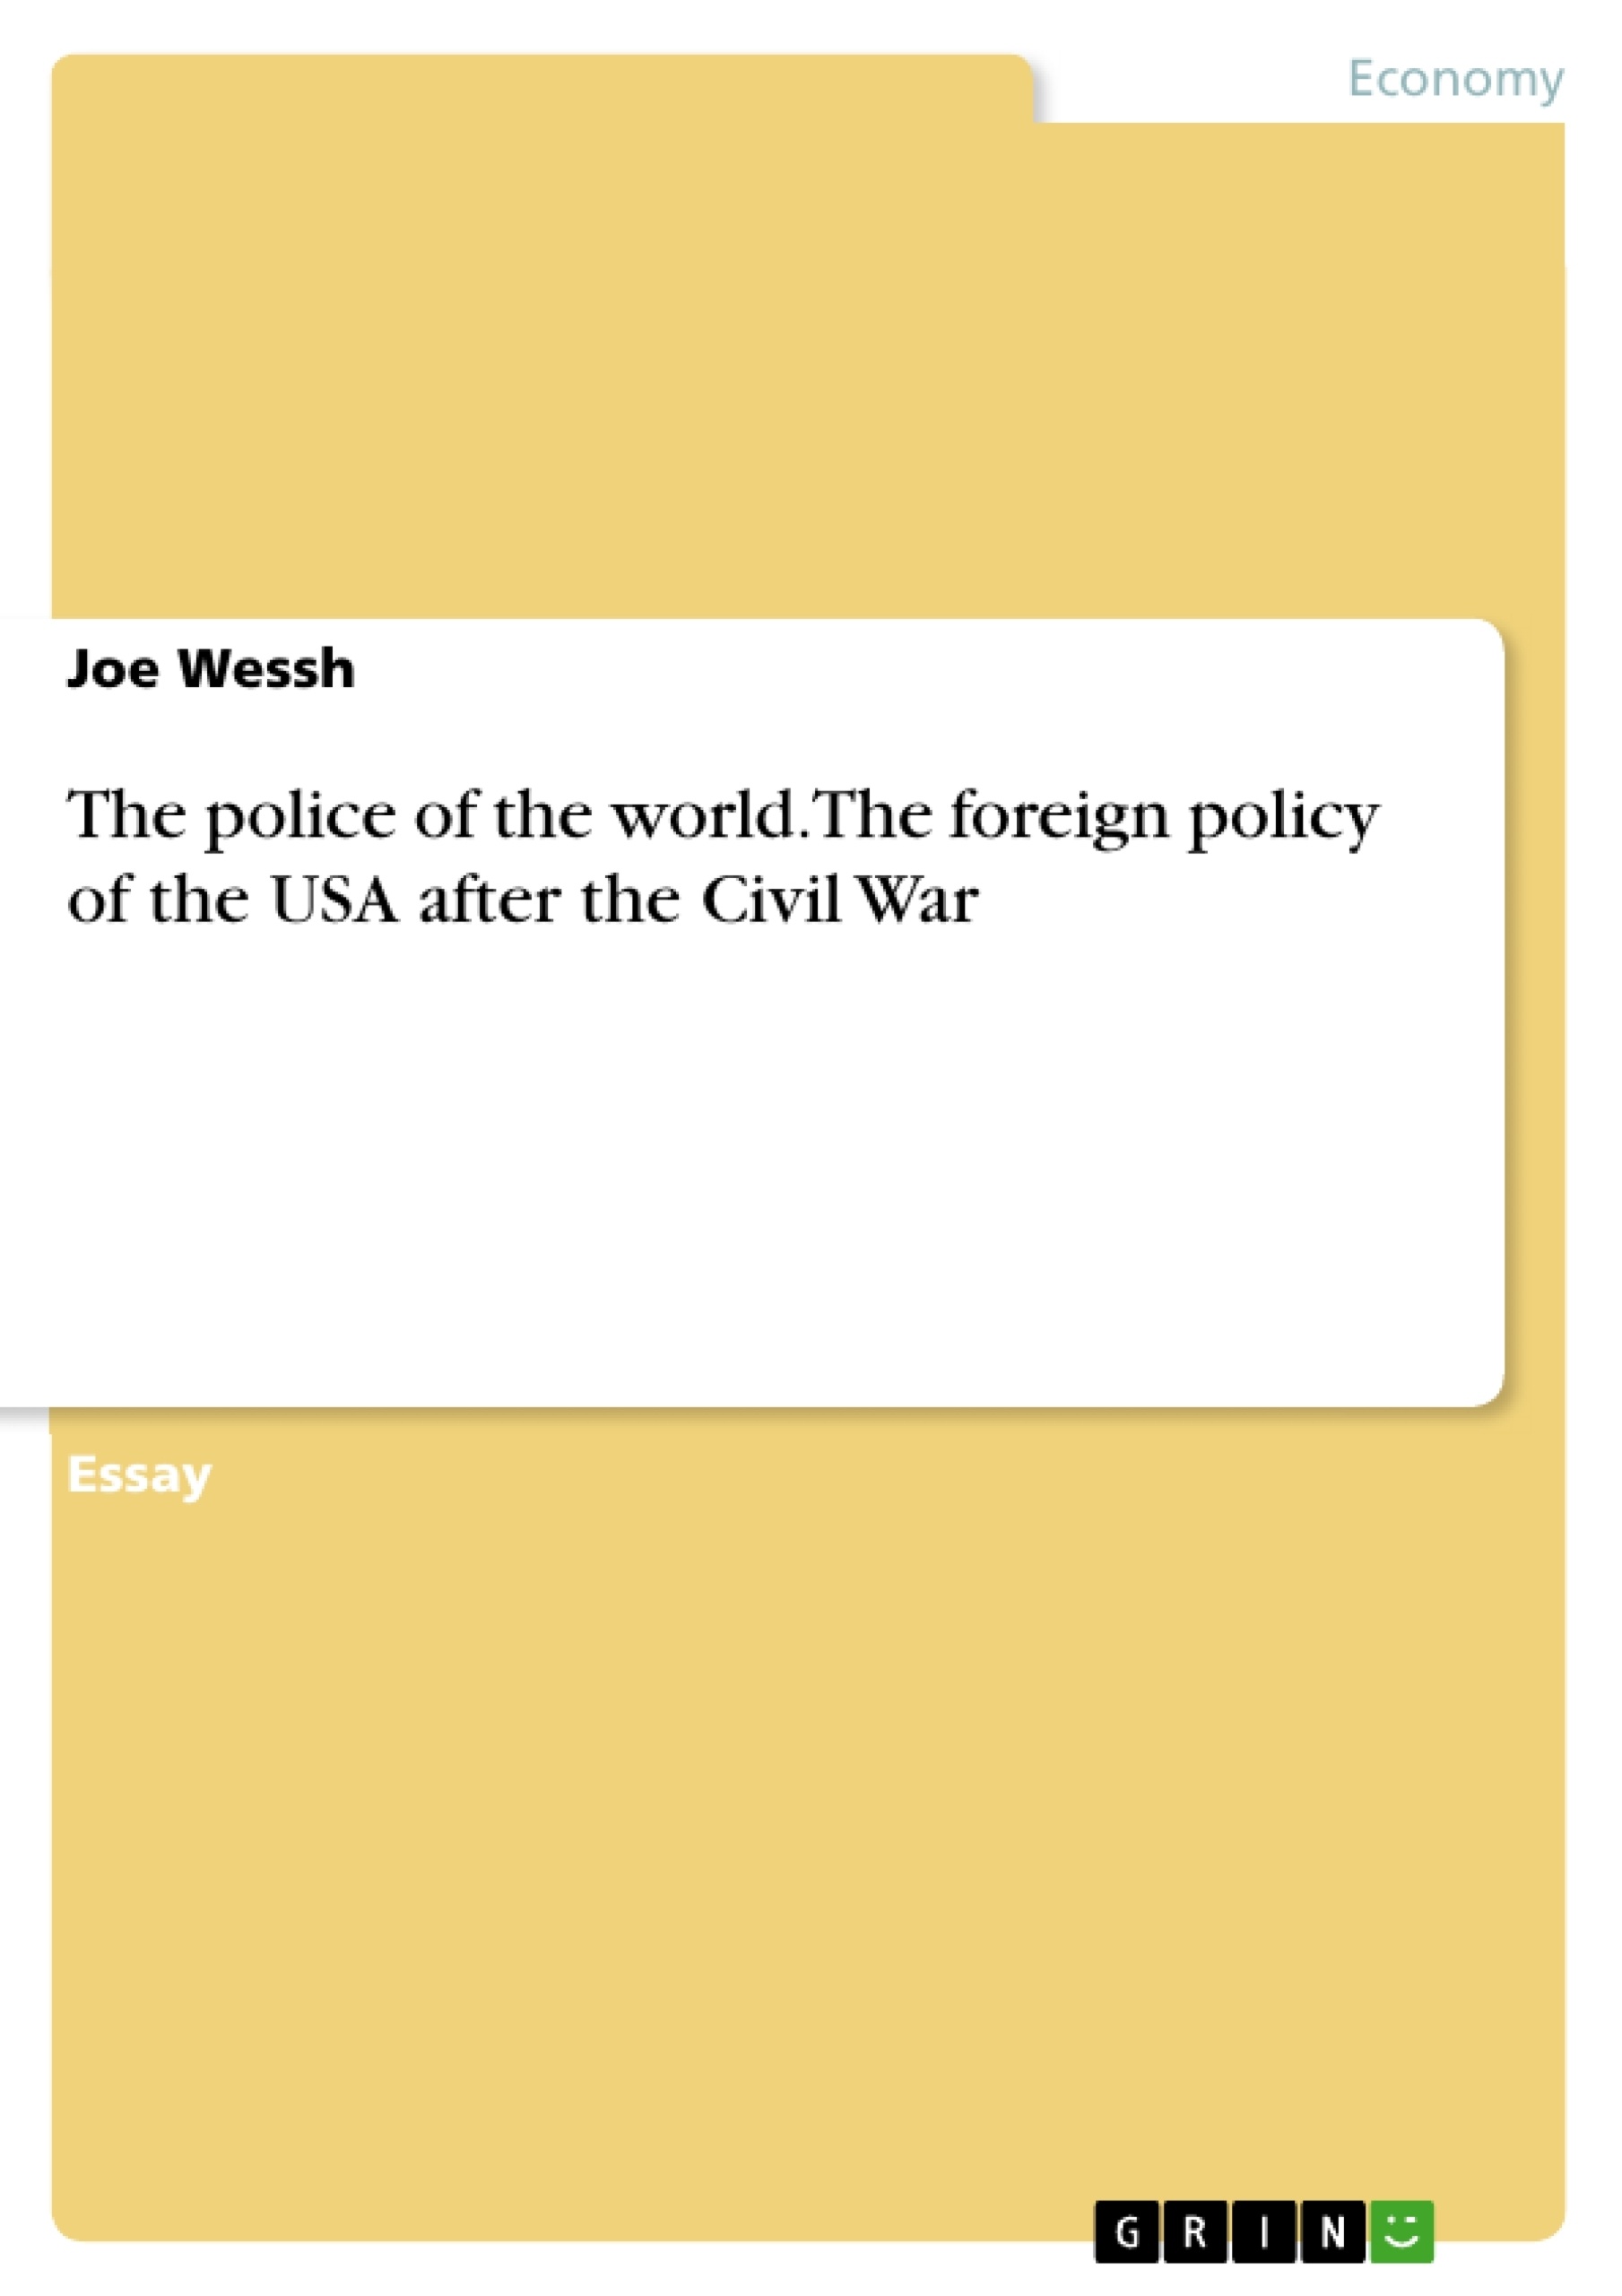 Title: The police of the world. The foreign policy of the USA after the Civil War